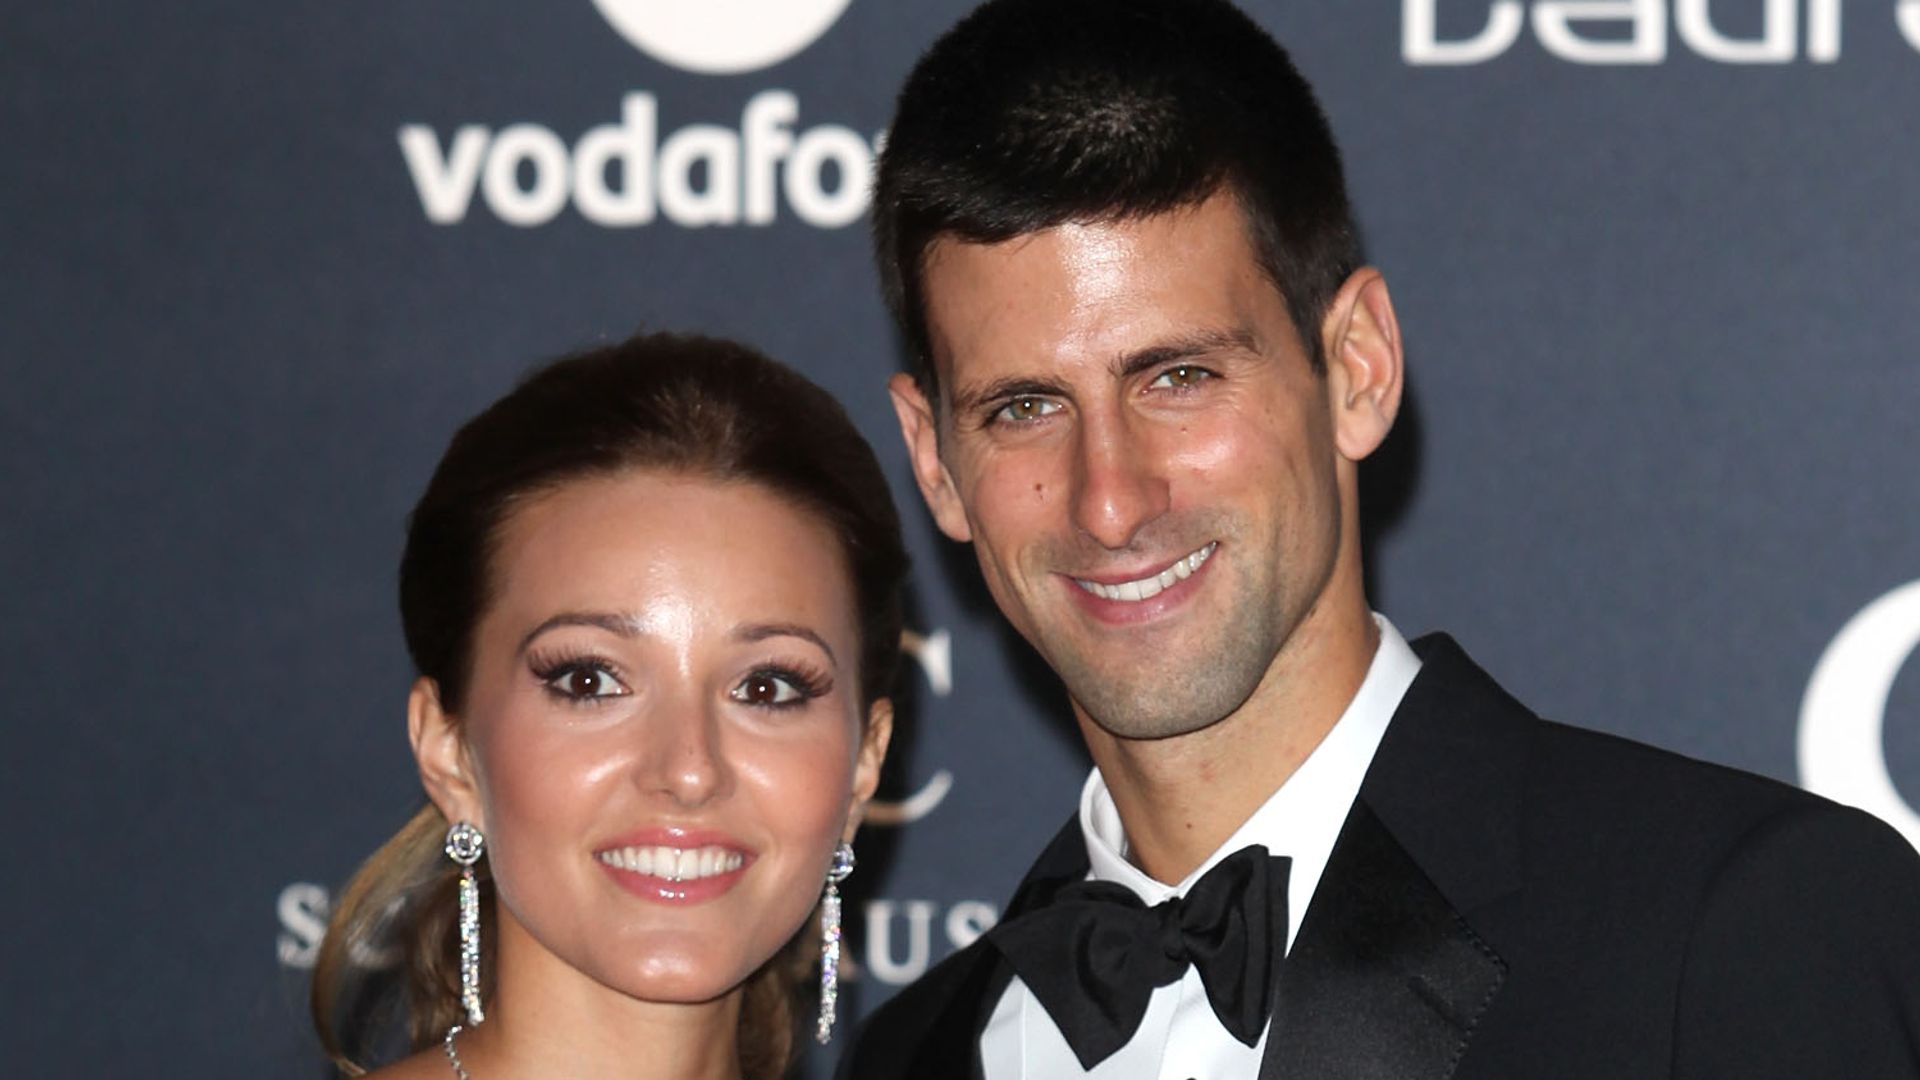 Who is Novak Djokovic's wife Jelena and how many children does he have